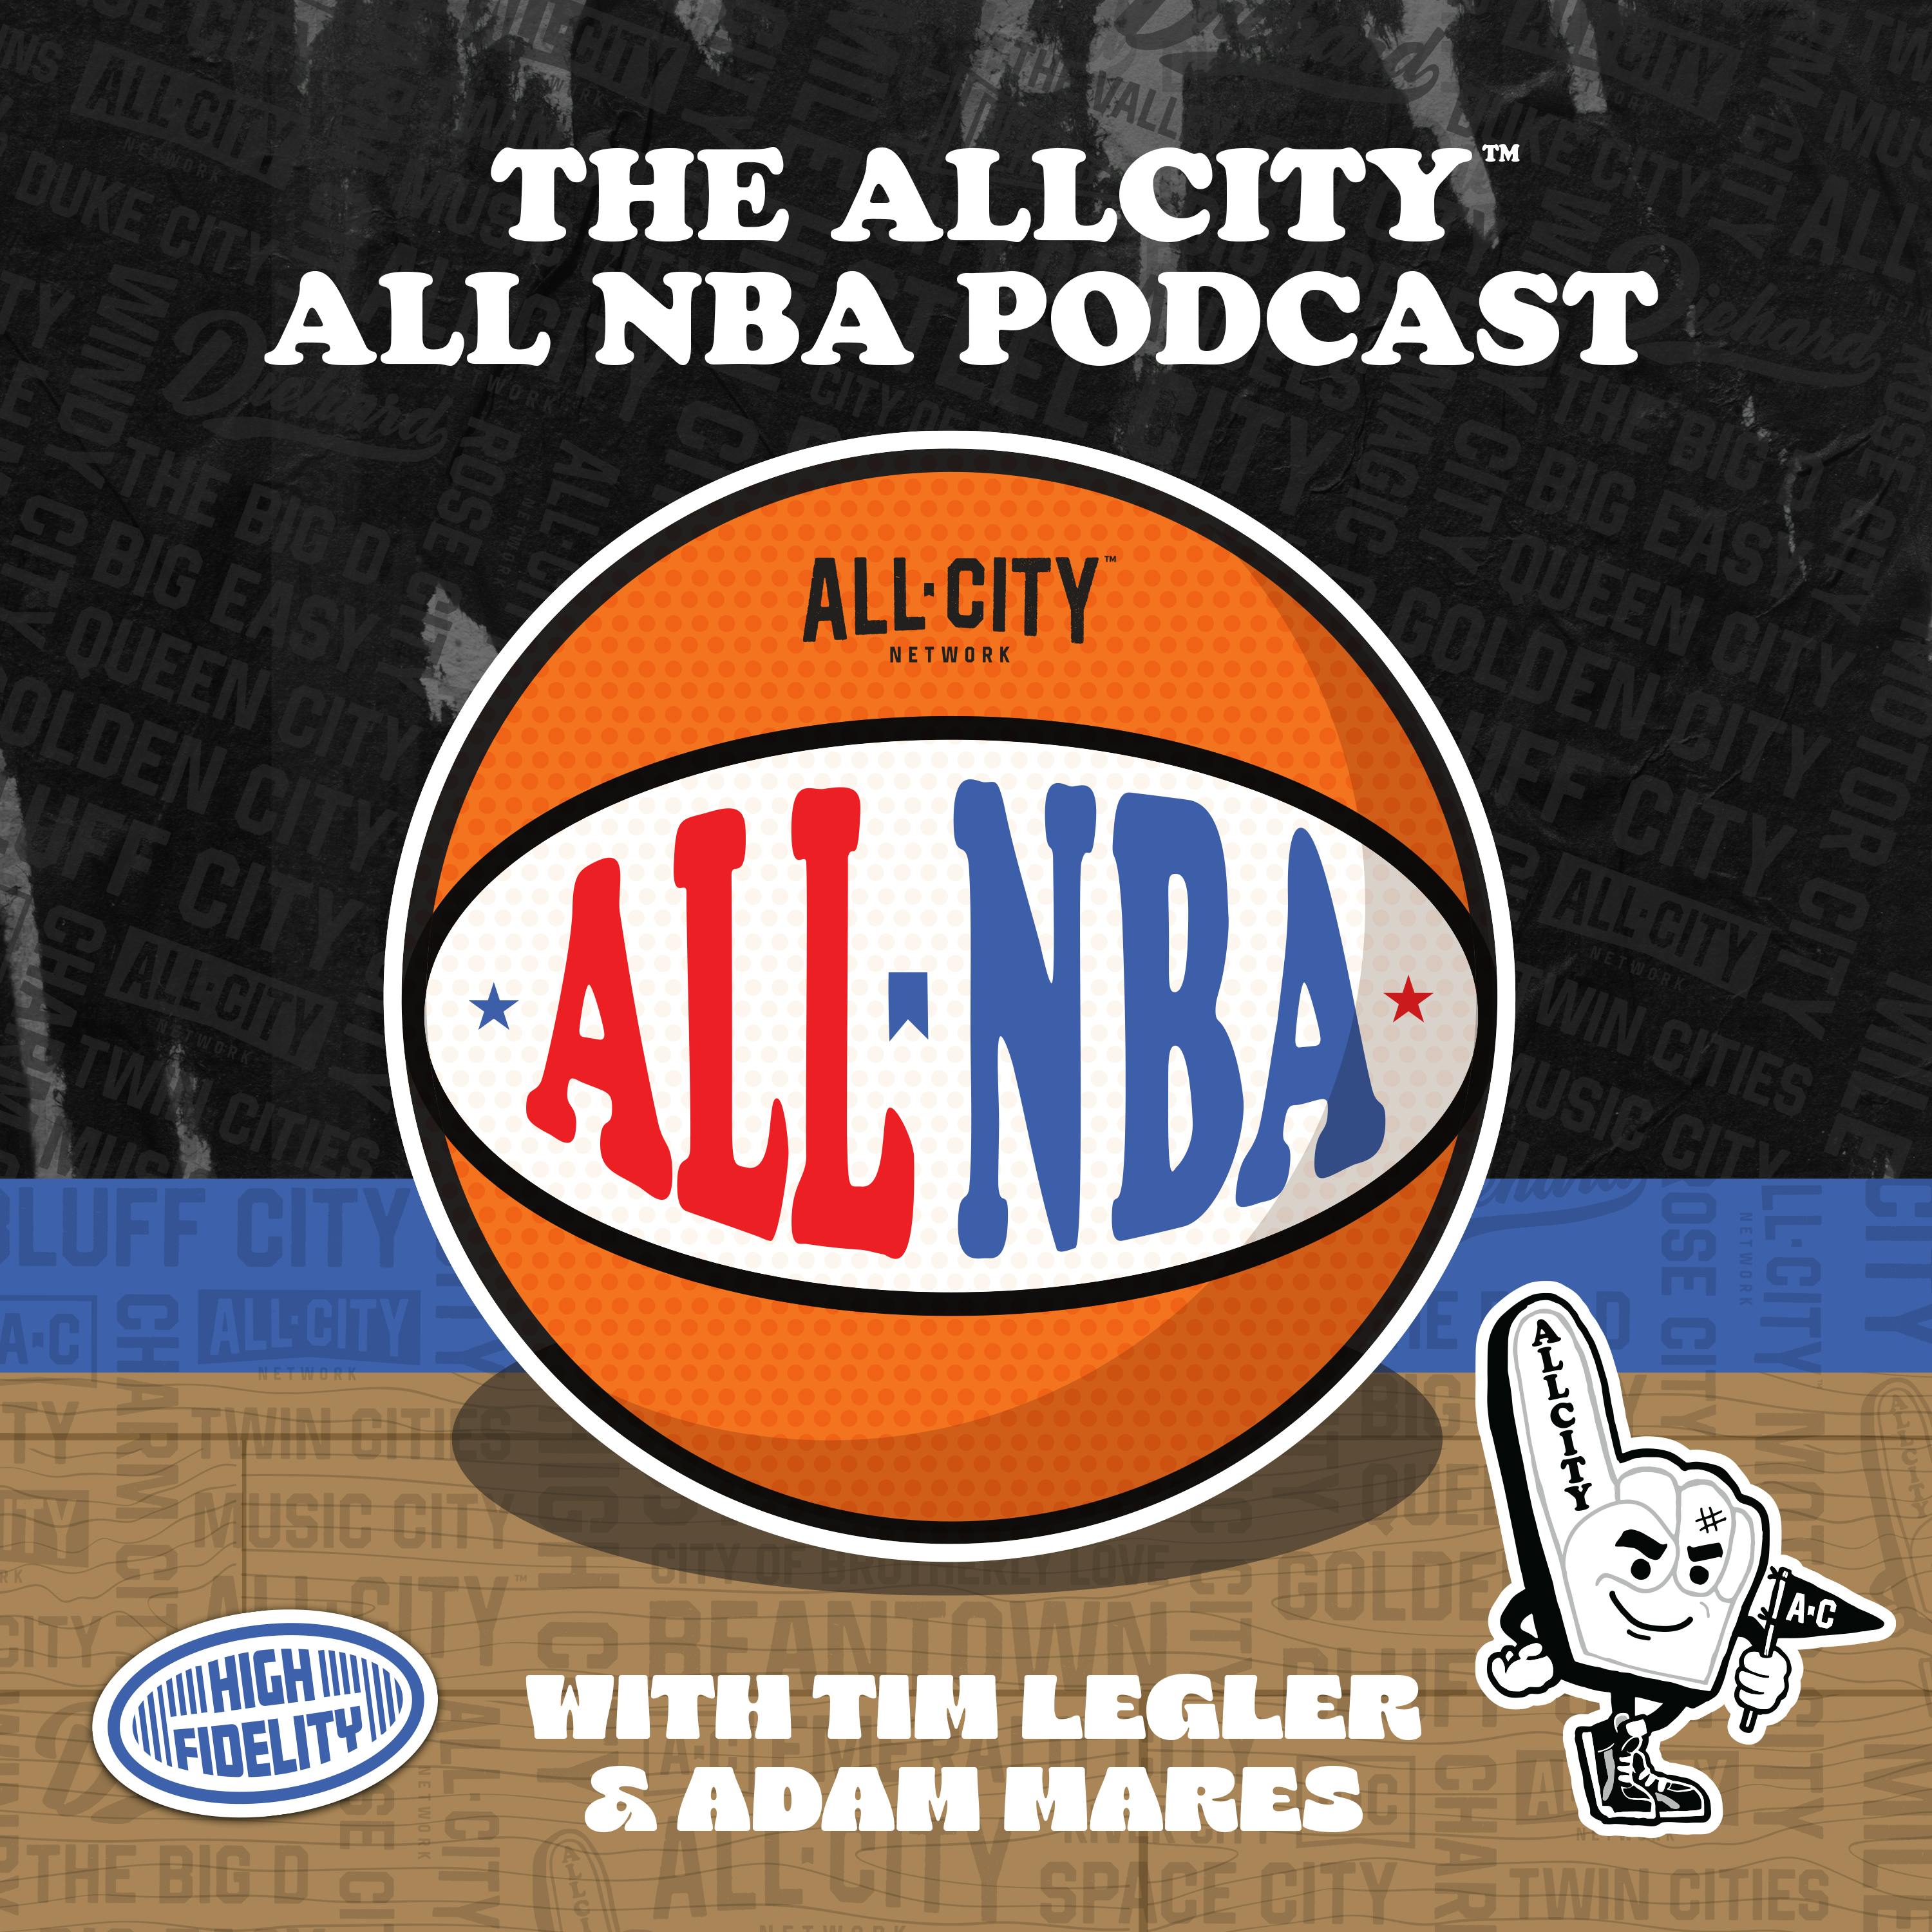 The ALL NBA Podcast: What makes Jokic and the Denver Nuggets unique?